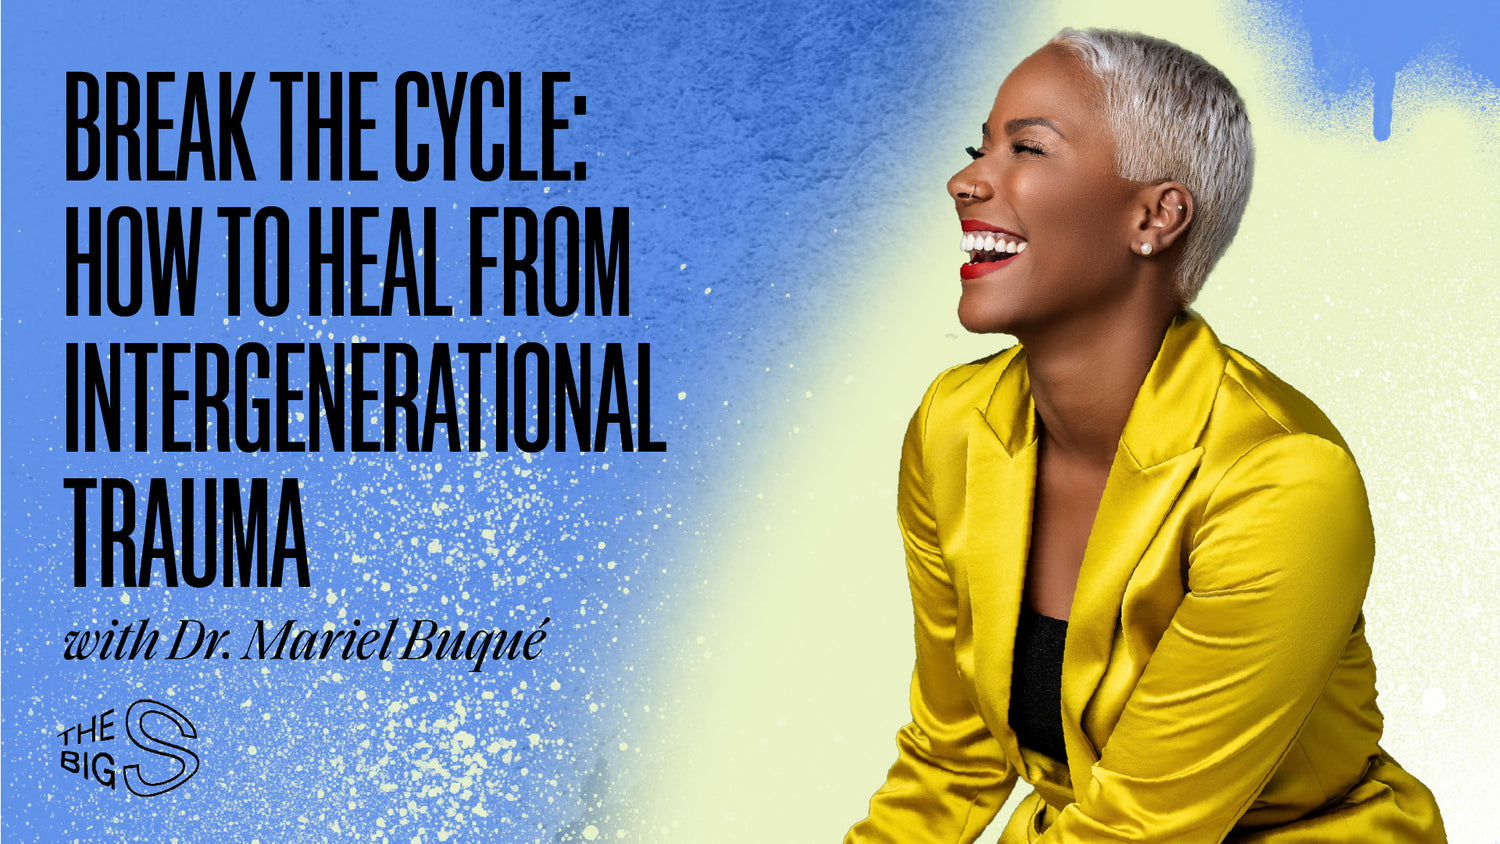 83. BREAK THE CYCLE: HOW TO HEAL FROM INTERGENERATIONAL TRAUMA WITH DR. MARIEL BUQUÉ